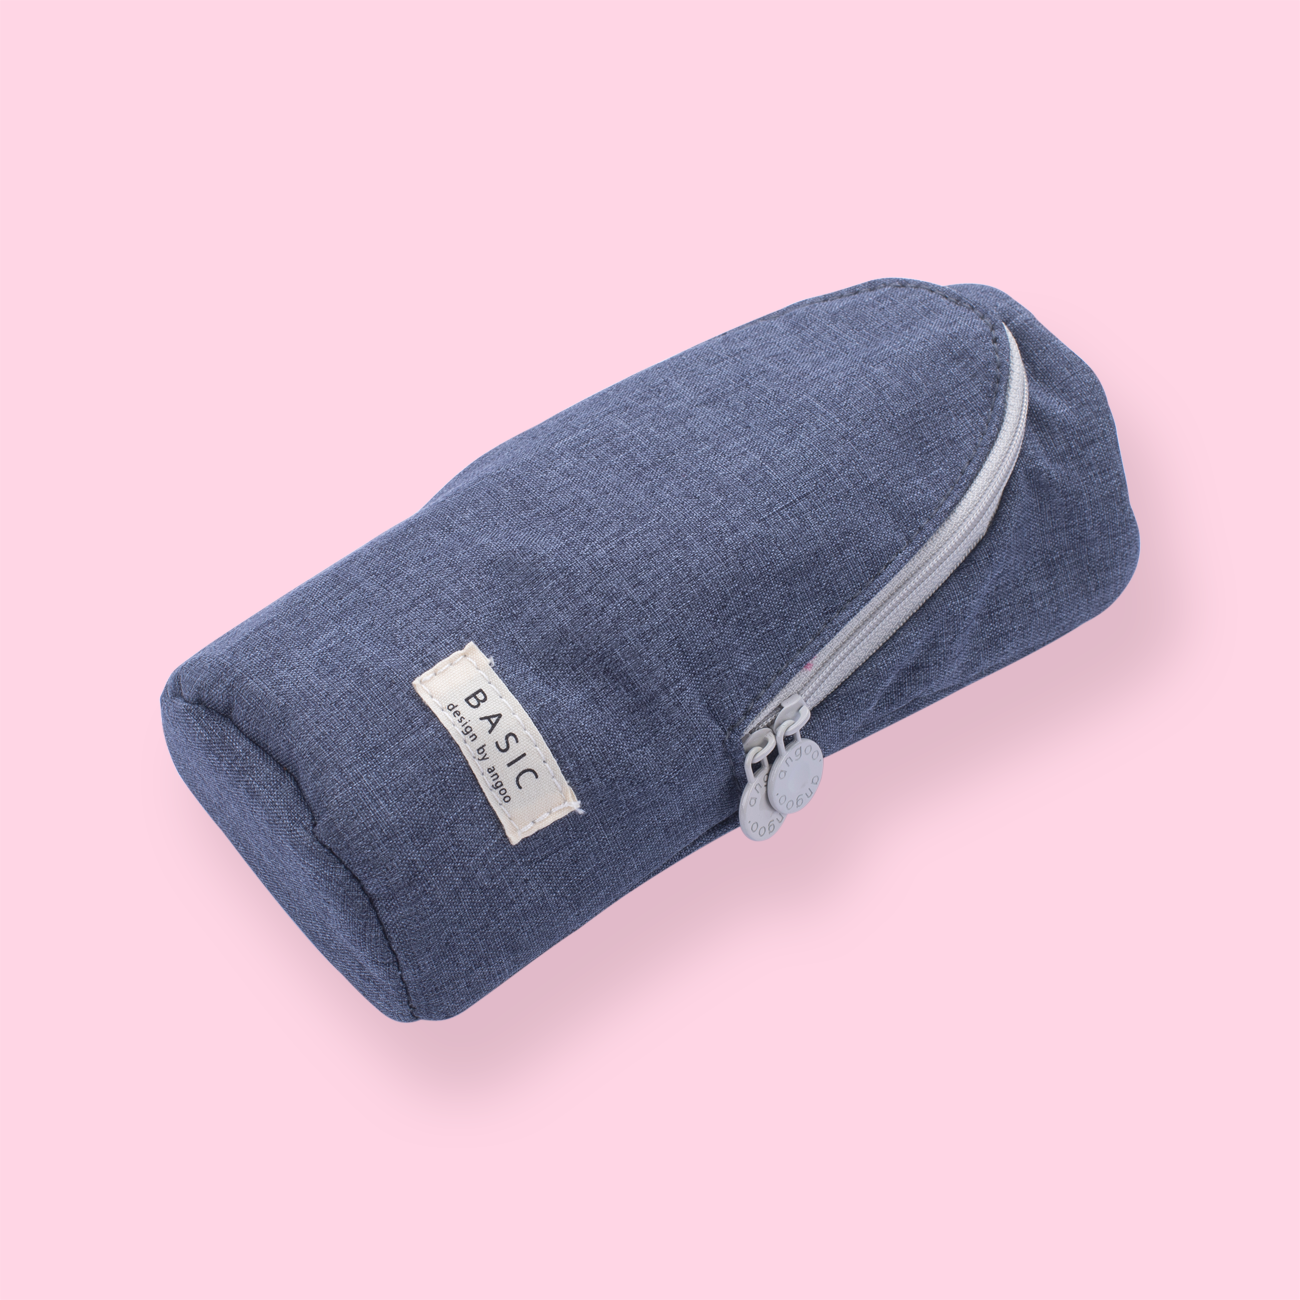 Stand Up Pencil Case - Dark Blue + Gray Side - Stationery Pal